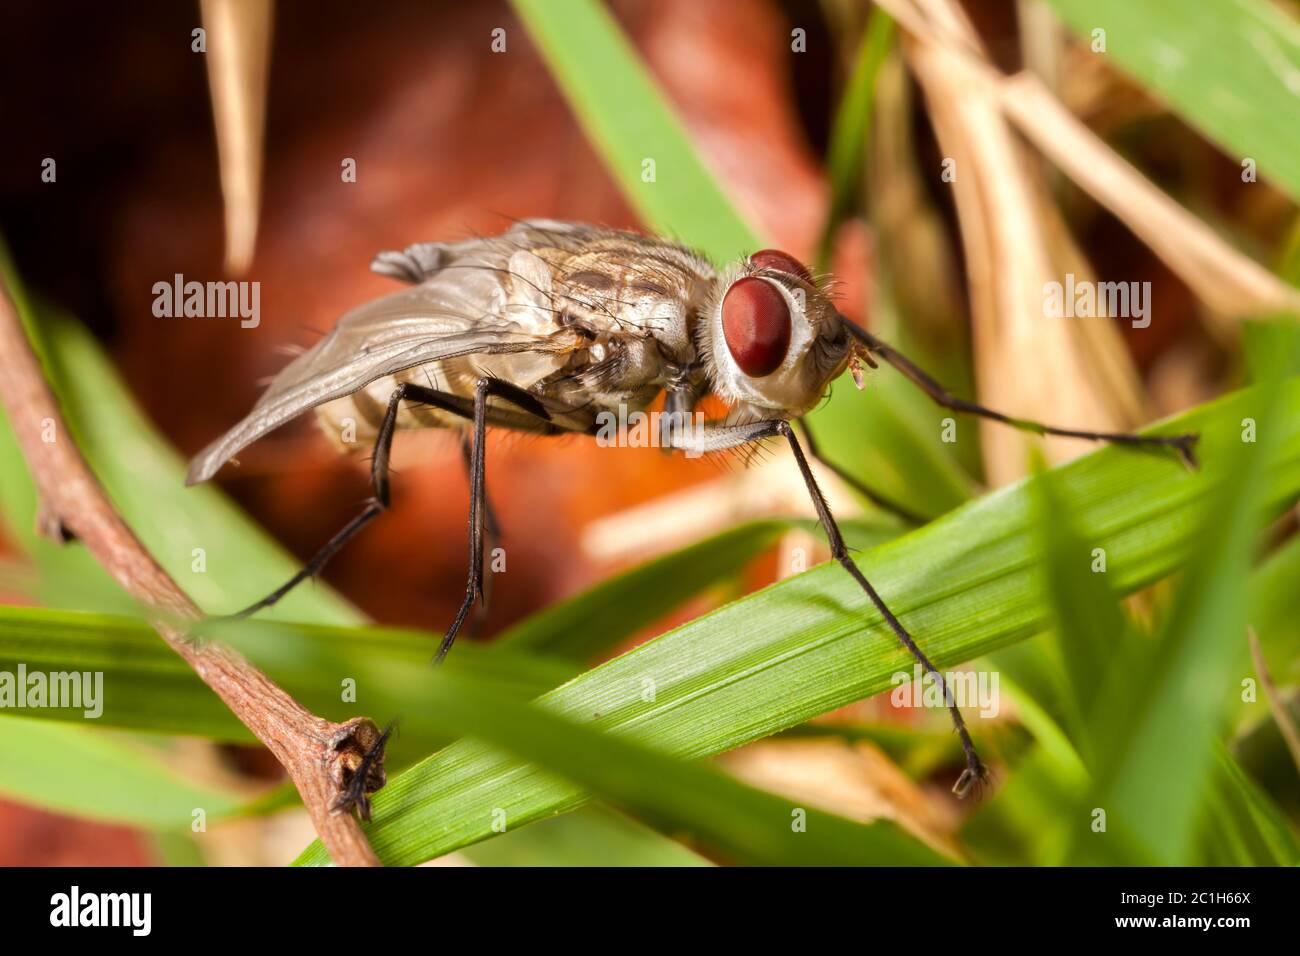 Young newborn house fly - housefly baby Stock Photo